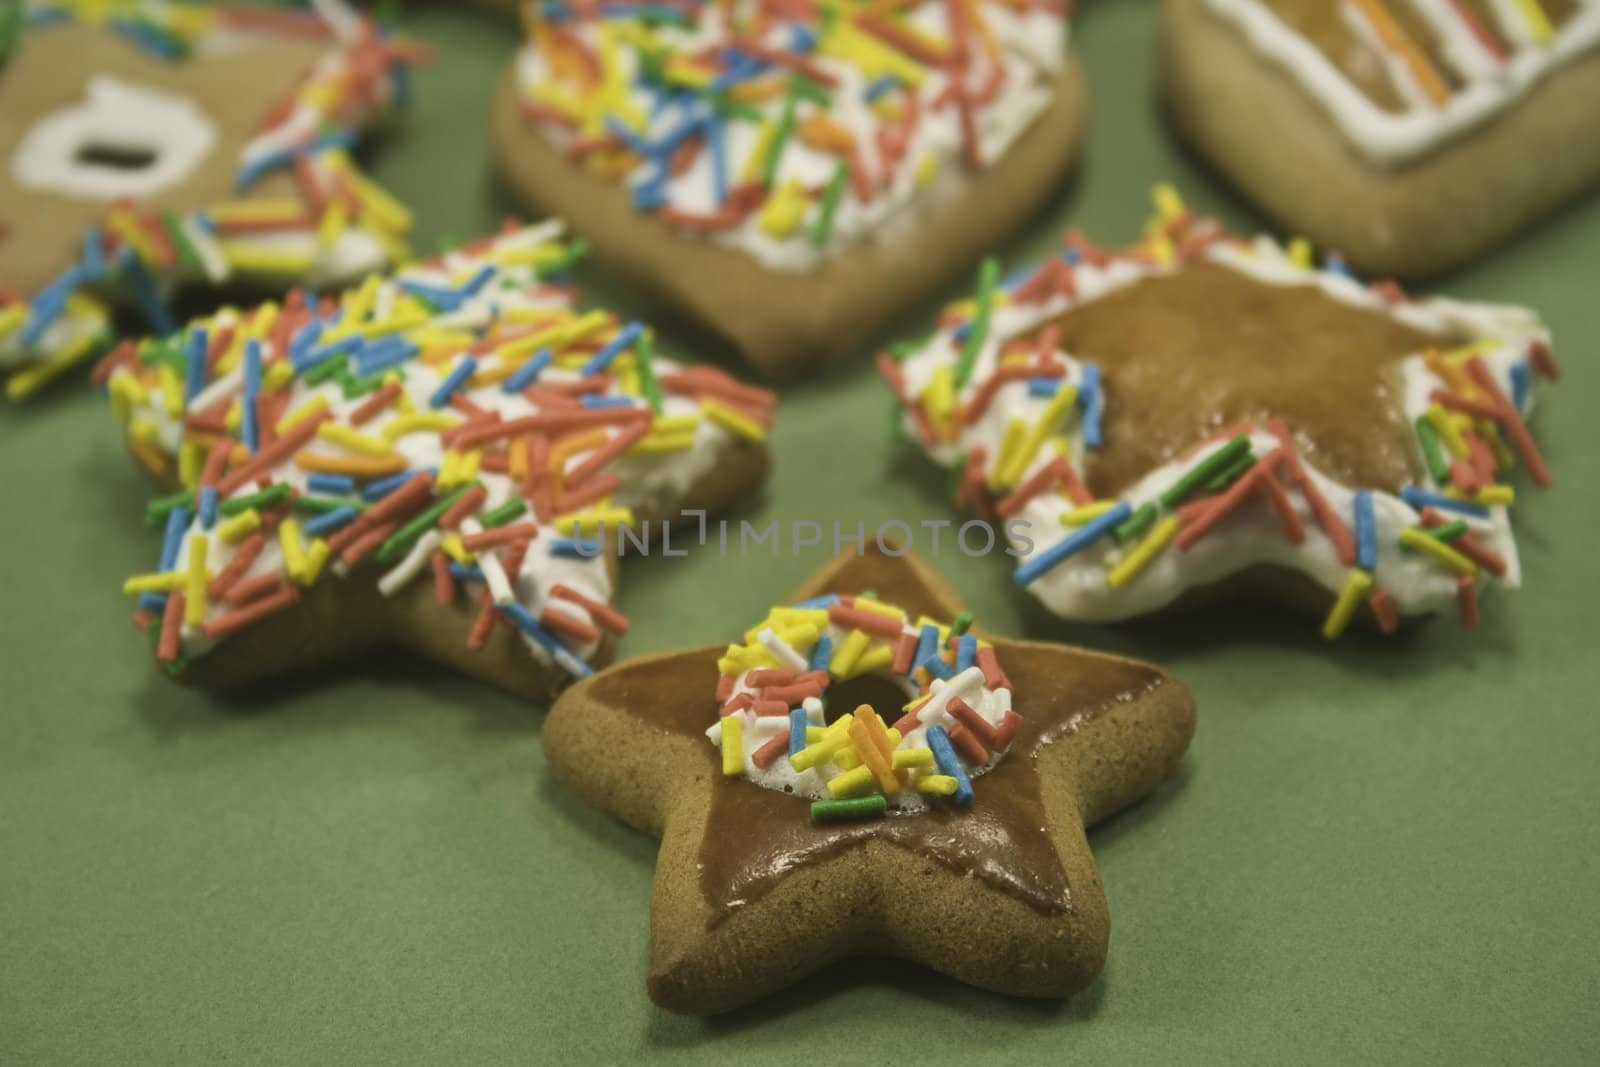 Decorated gingerbread cookies on green paper focus on front row